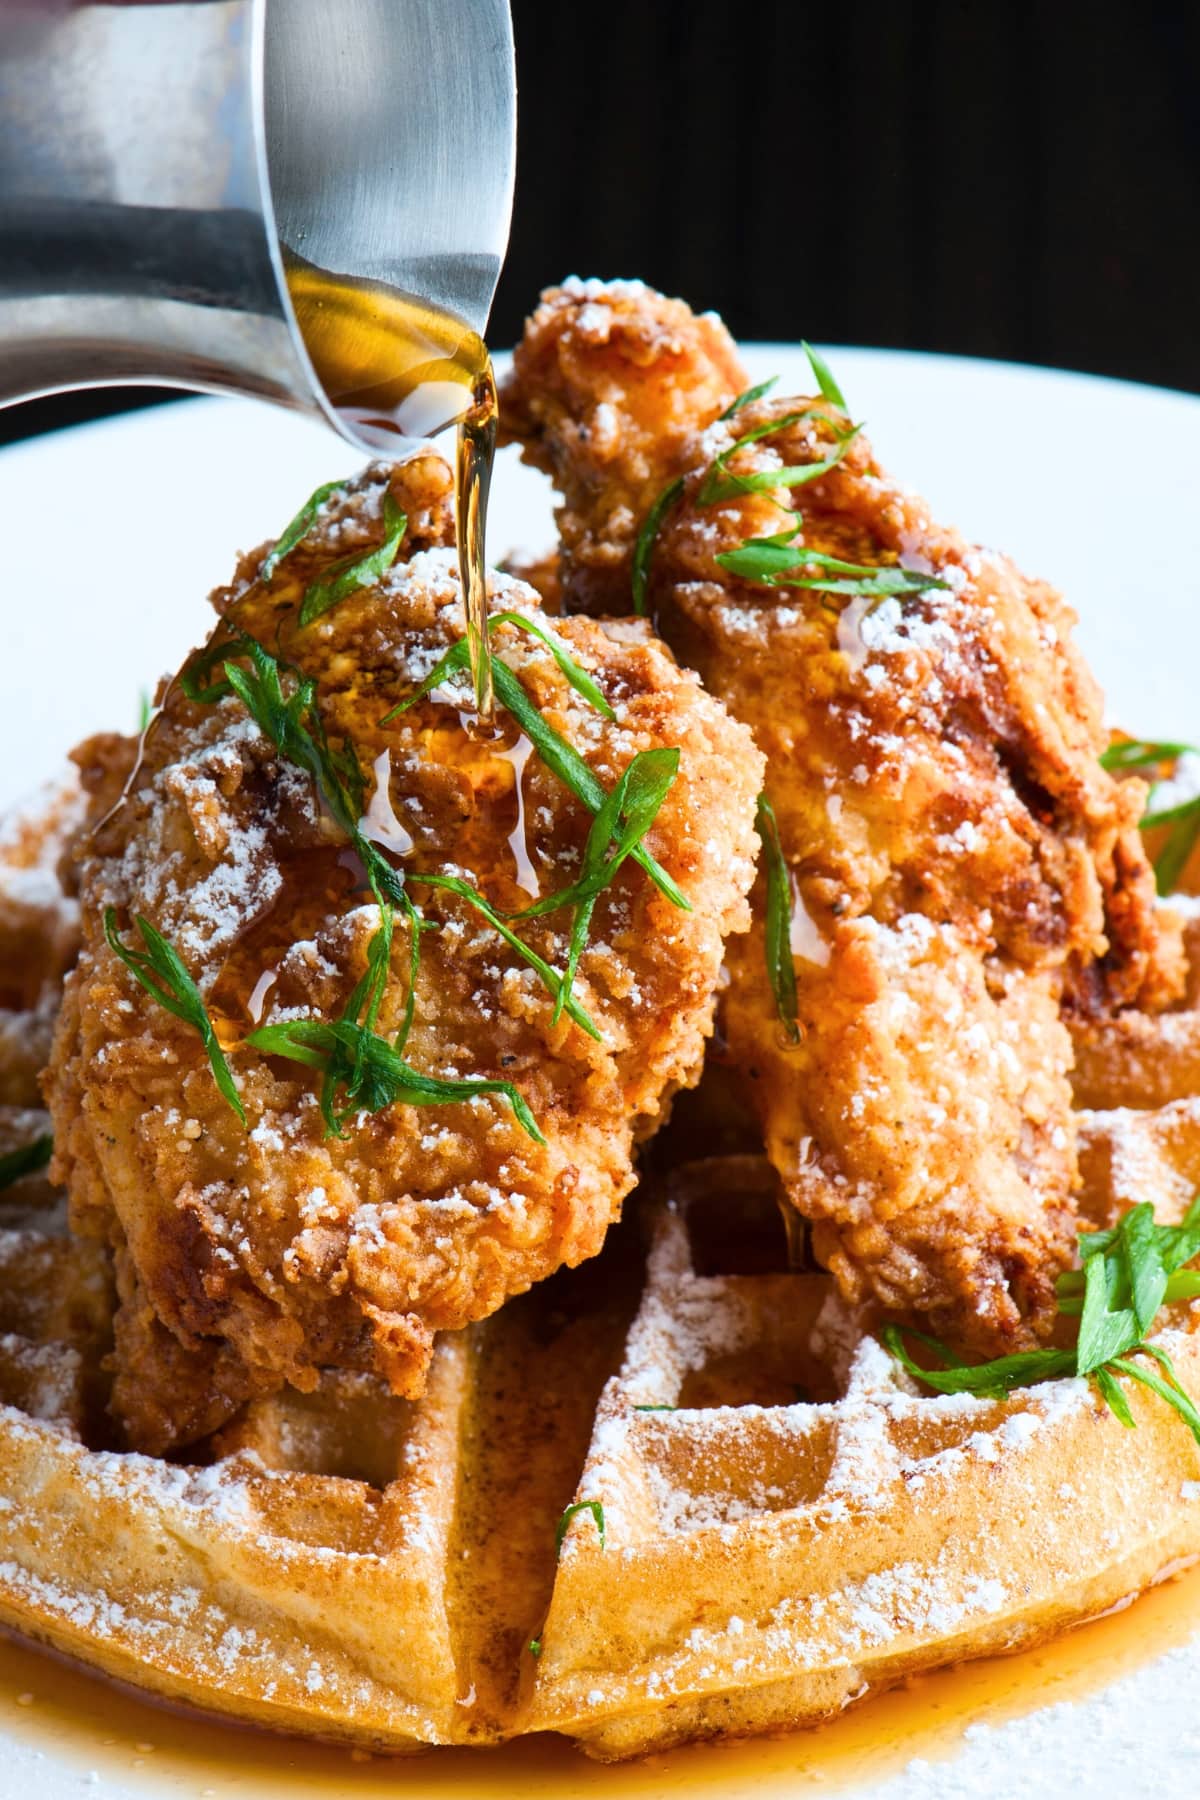 Waffles topped with fried chicken drizzled with maple syrup.